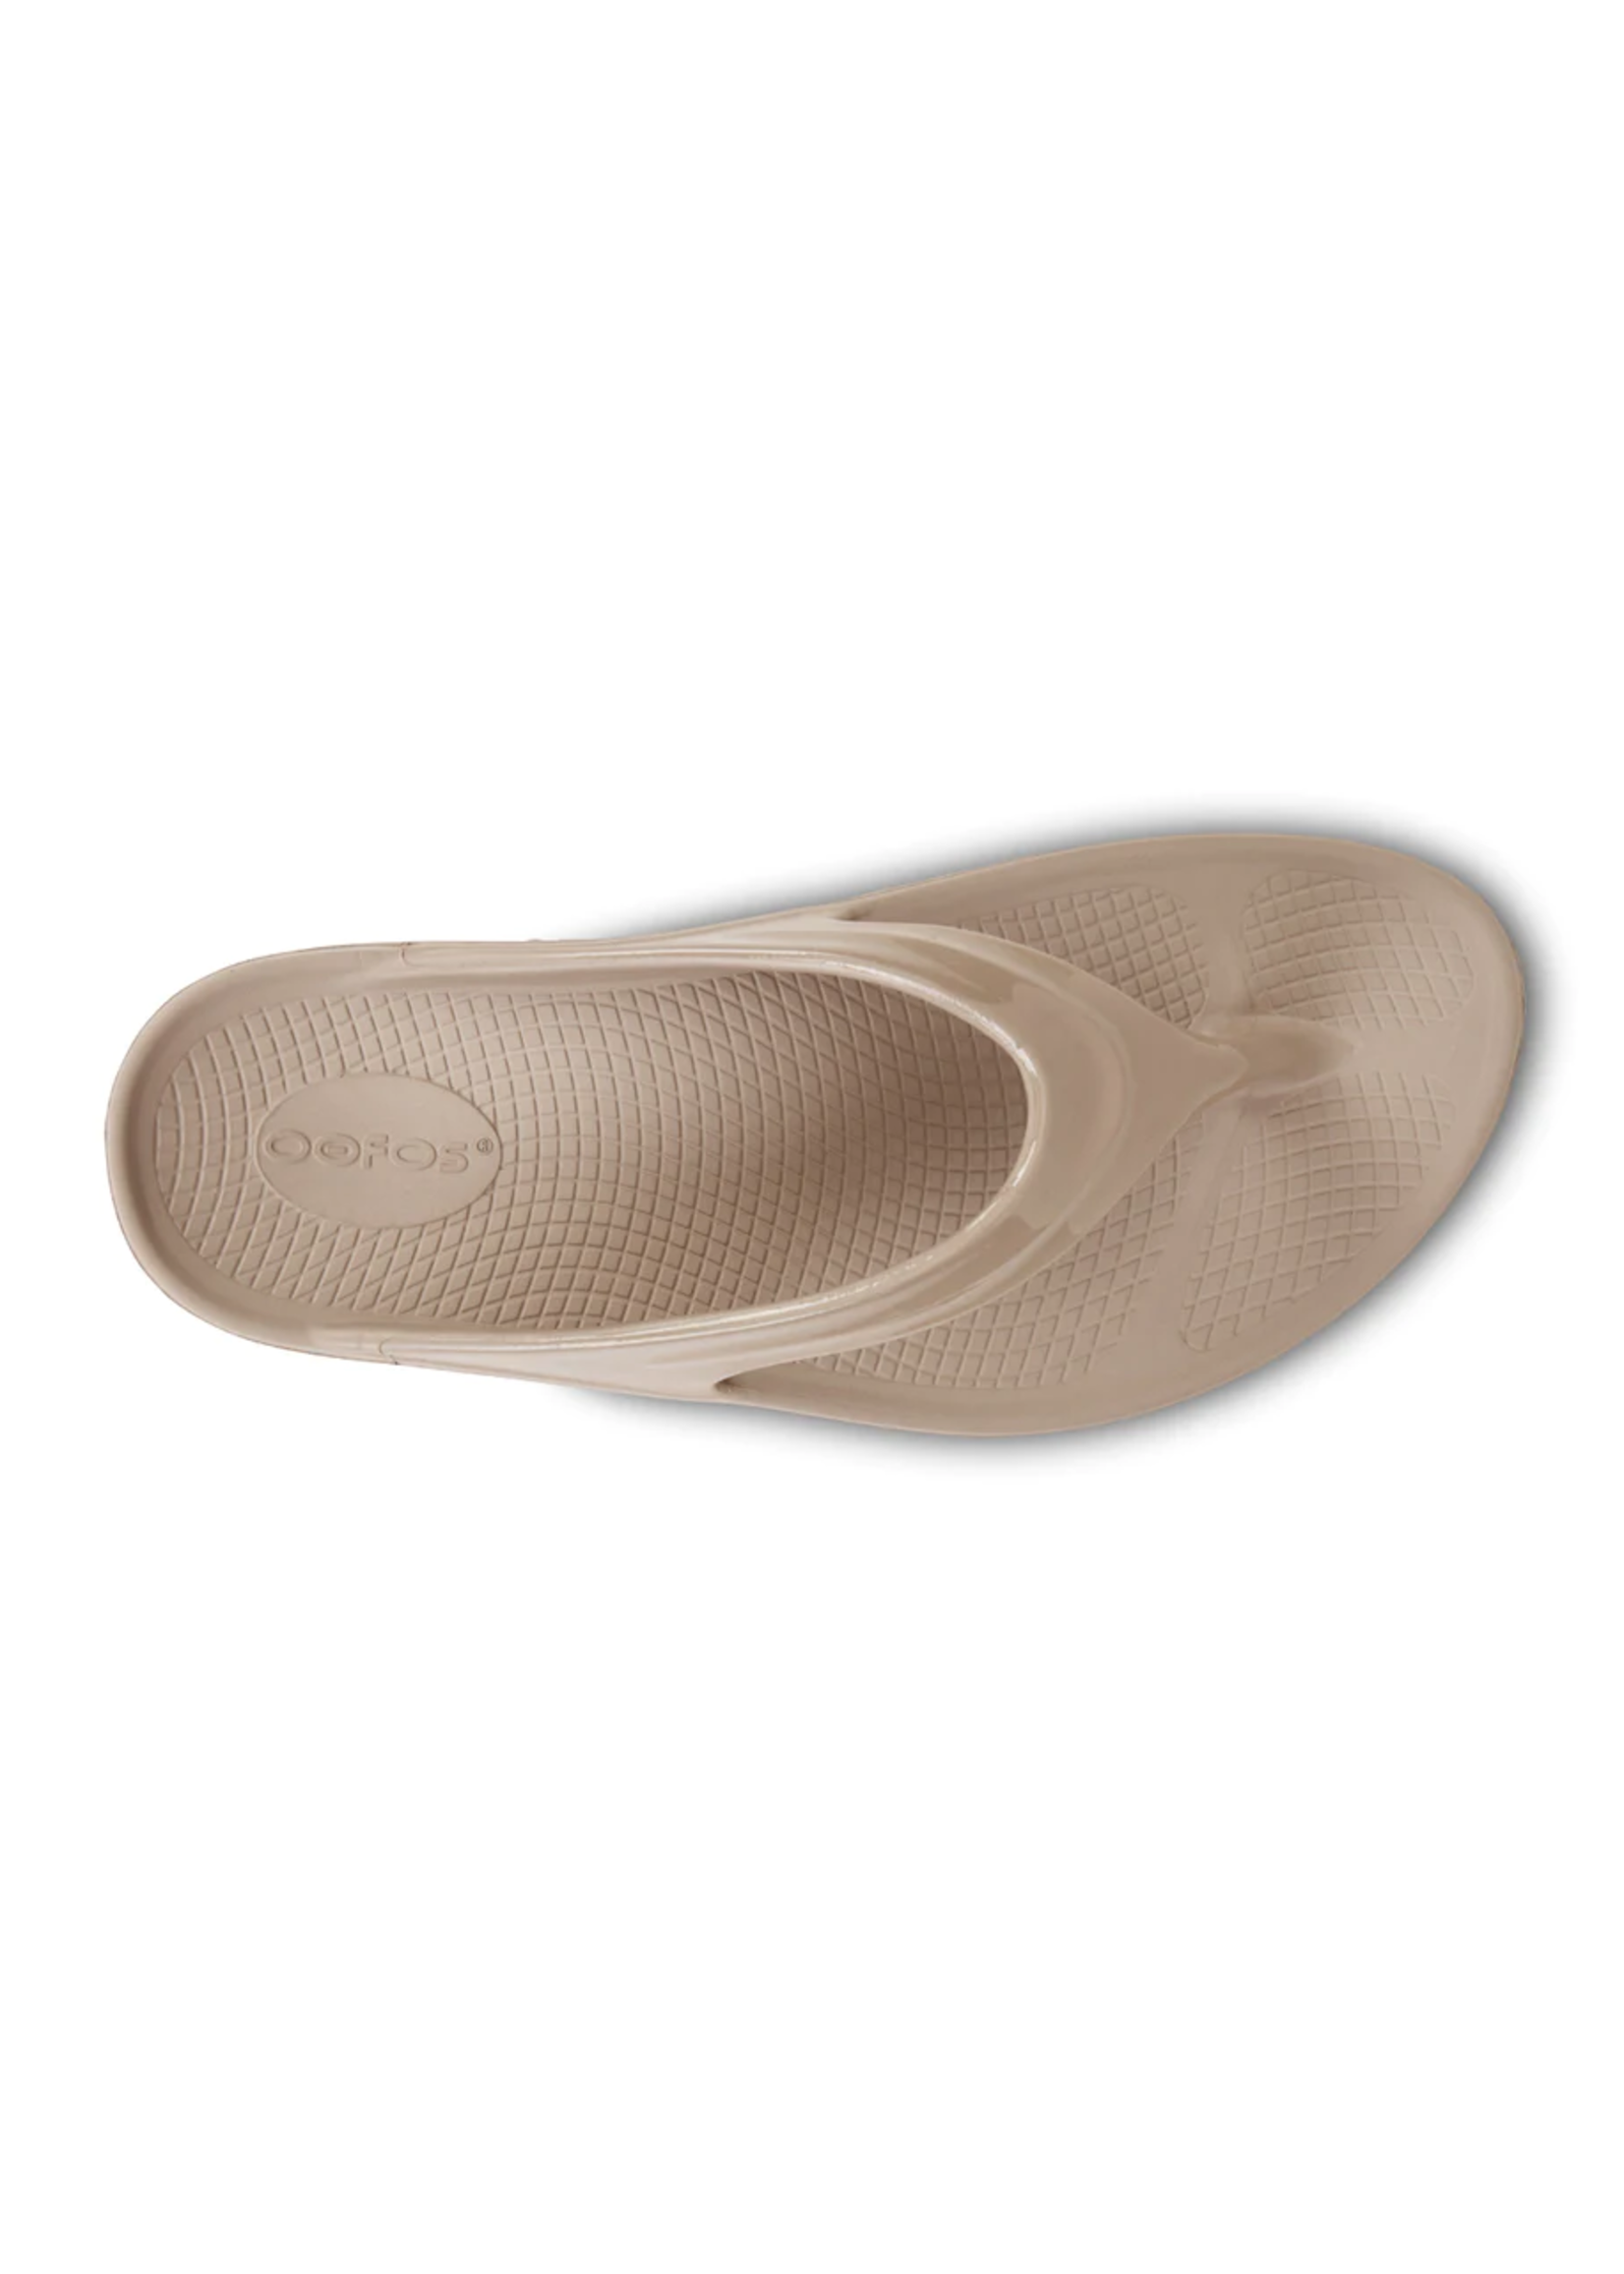 OOFOS 1410 OOMEGA OOFOAM RECOVERY DOUBLE SOLE FLIP FLOP